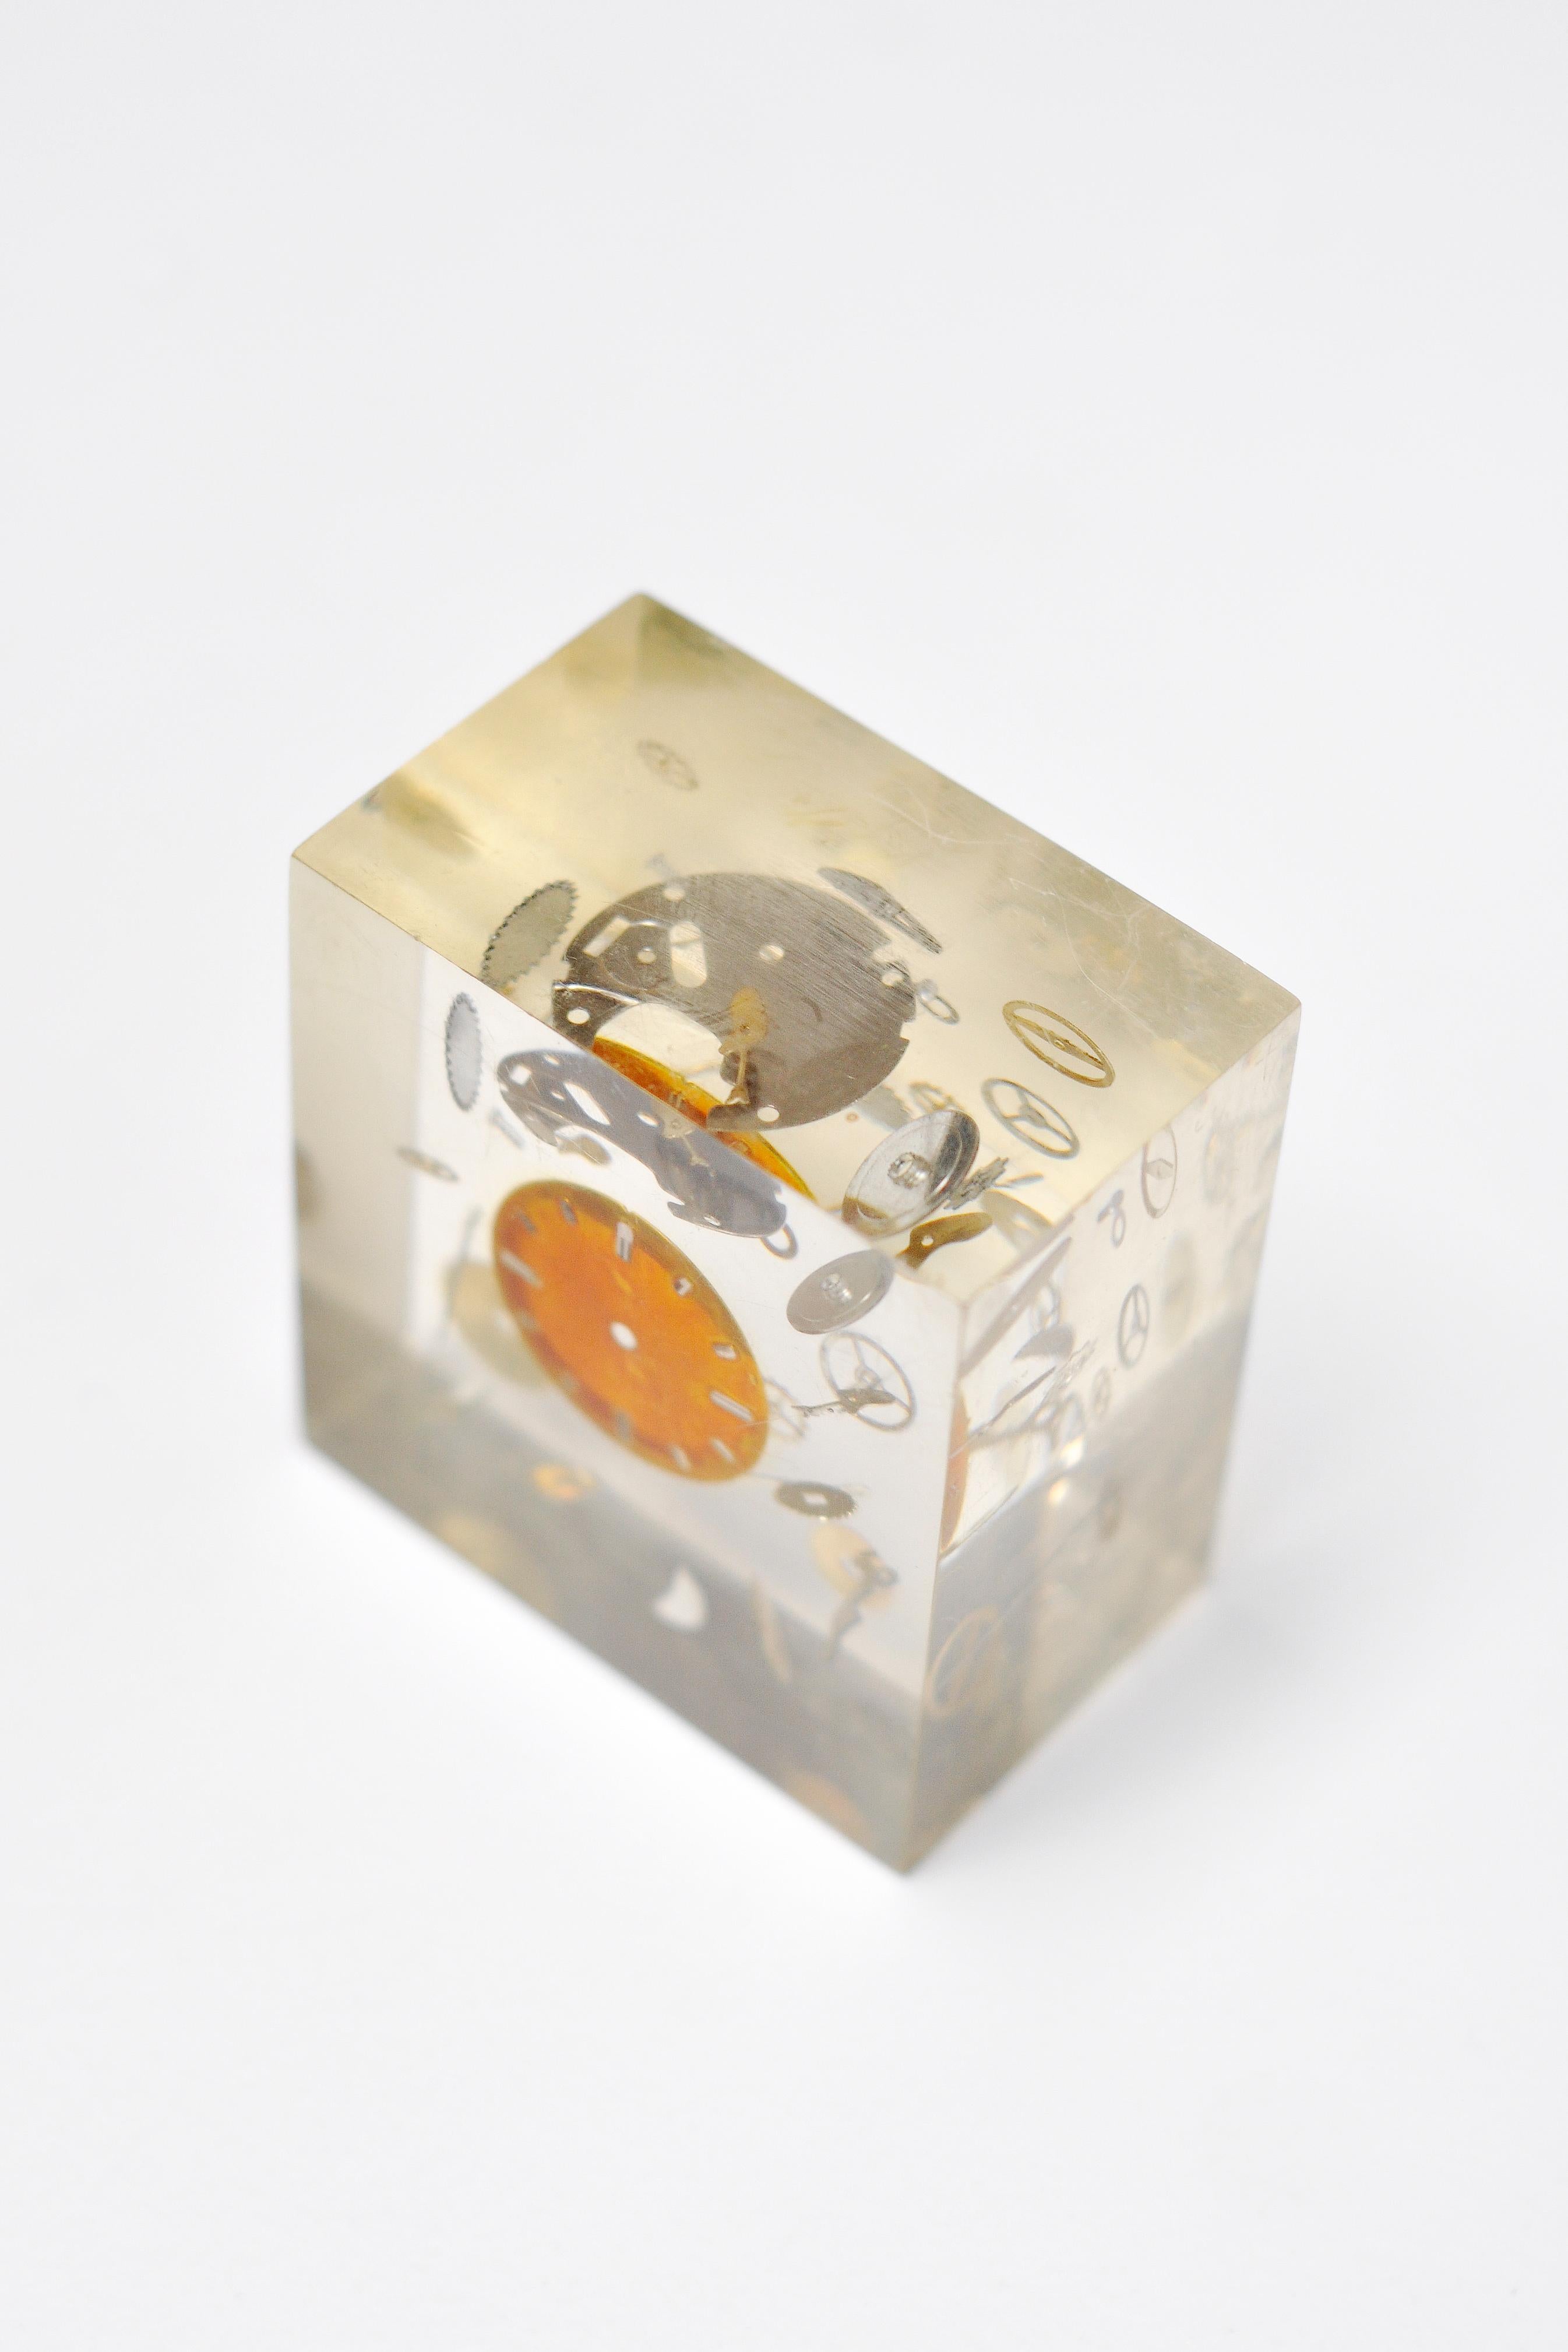 Late 20th Century Modernist Lucite Resin Sculpture with Exploded Clock by Pierre Giraudon, 1970's For Sale